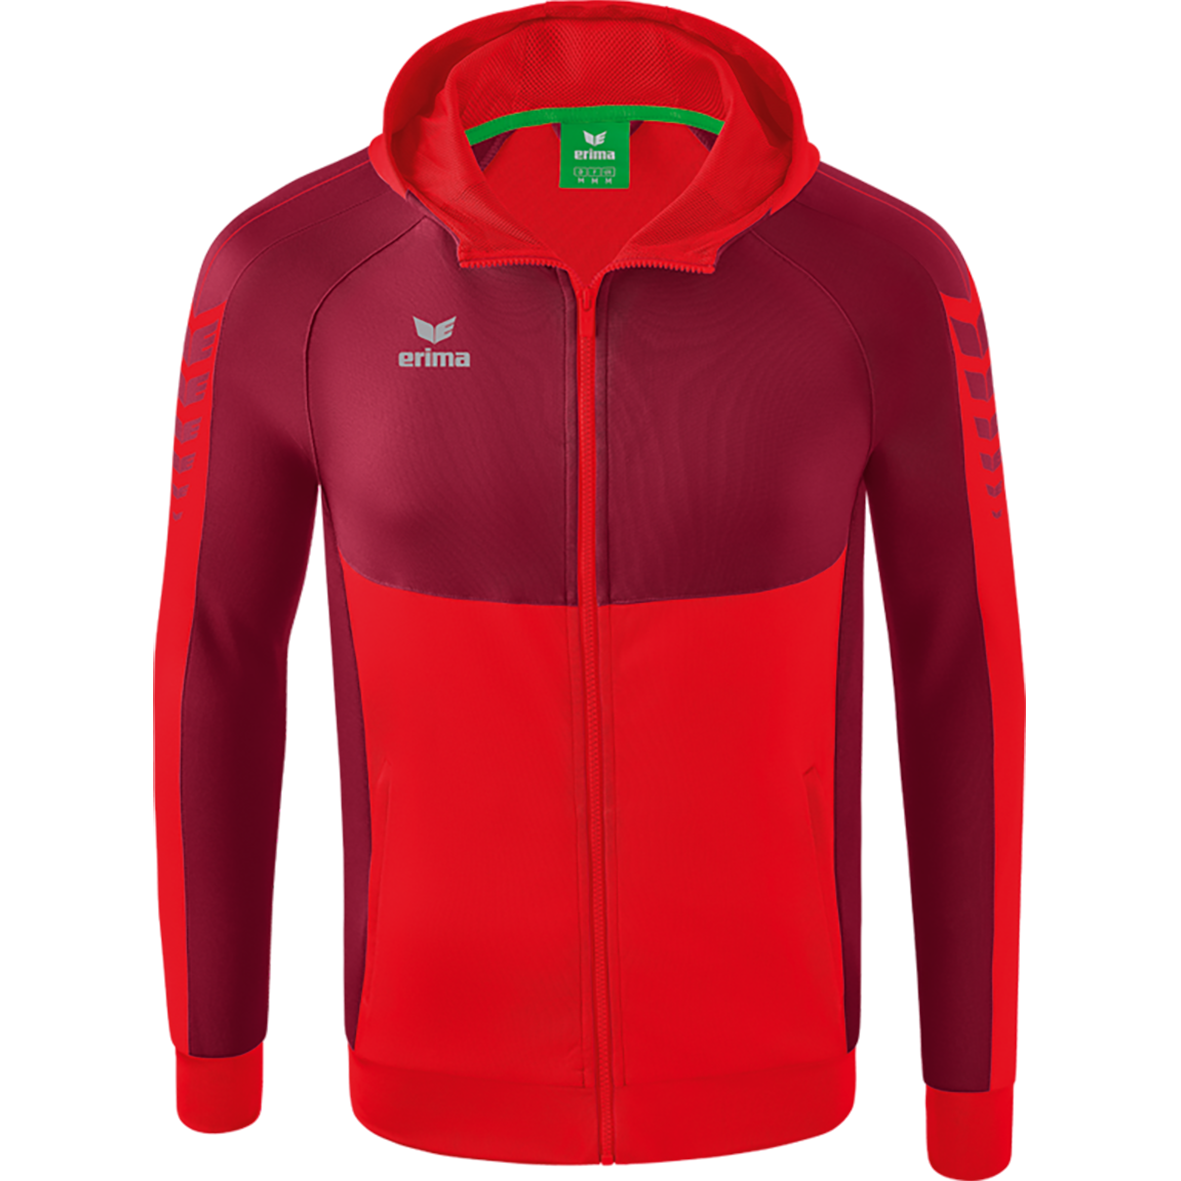 ERIMA SIX WINGS TRAINING JACKET WITH HOOD, RED-BORDEAUX KIDS.